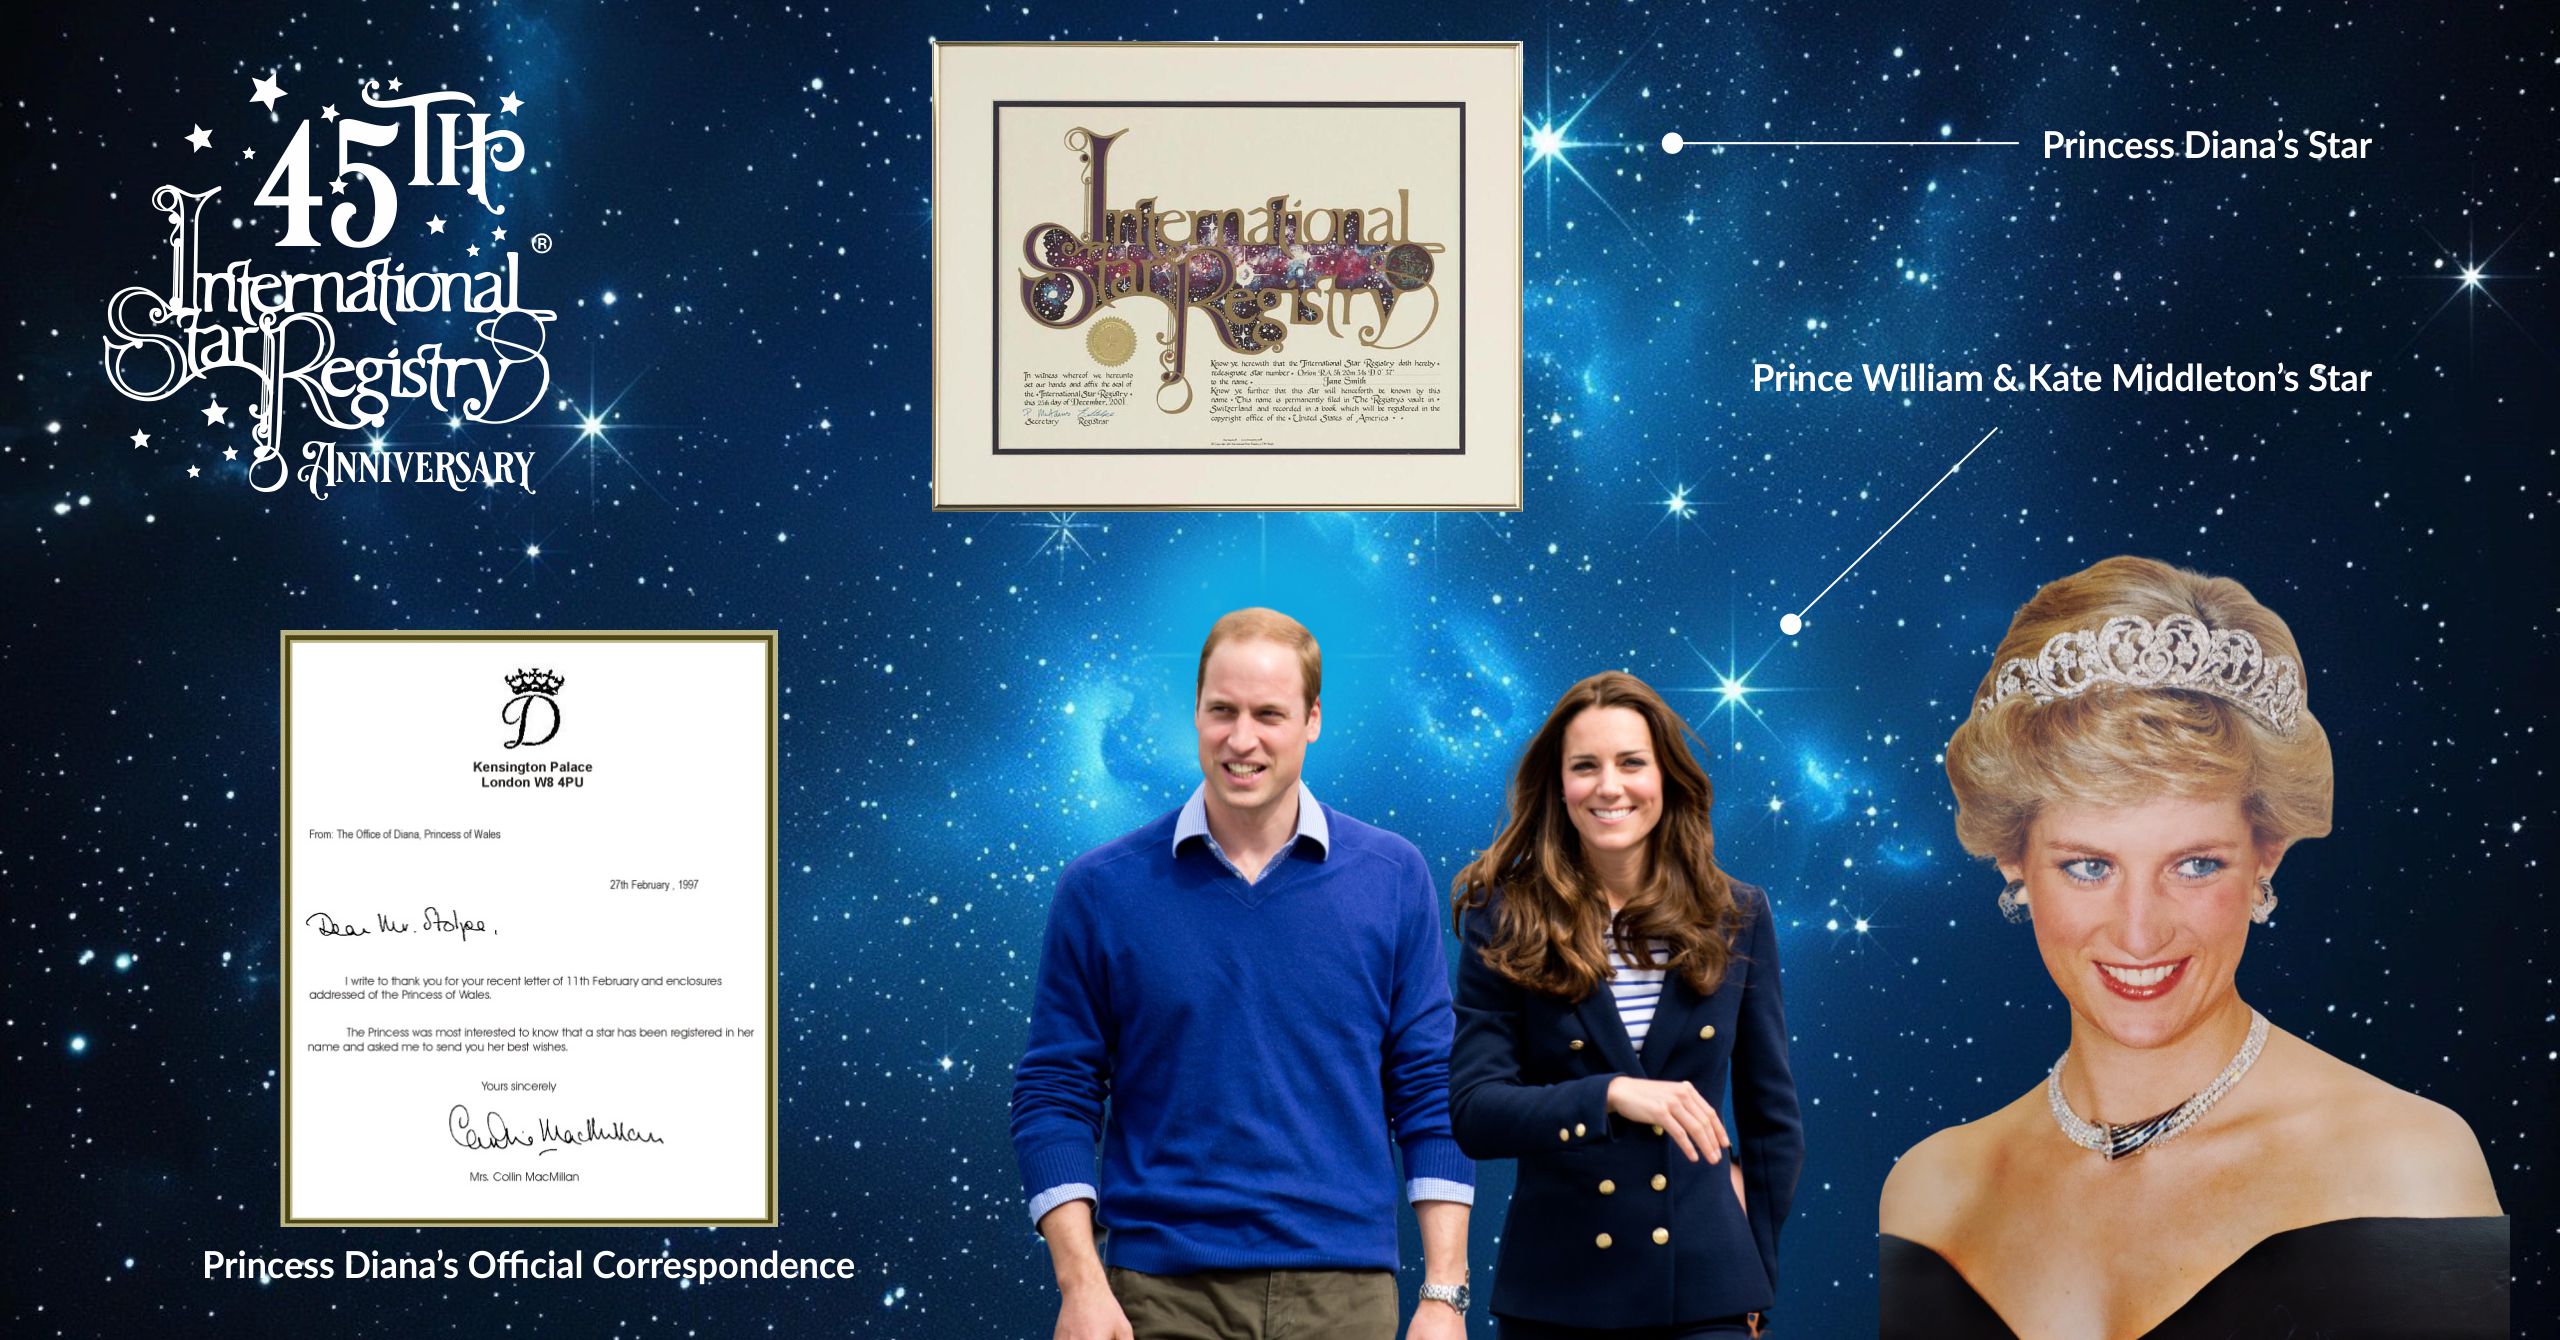 Name a star package. International Star Registry 45th Anniversary logo. Image of Princess Diana's stationary dated February 29, 1997. Princess Diana, Prince William, and Kate Middleton.